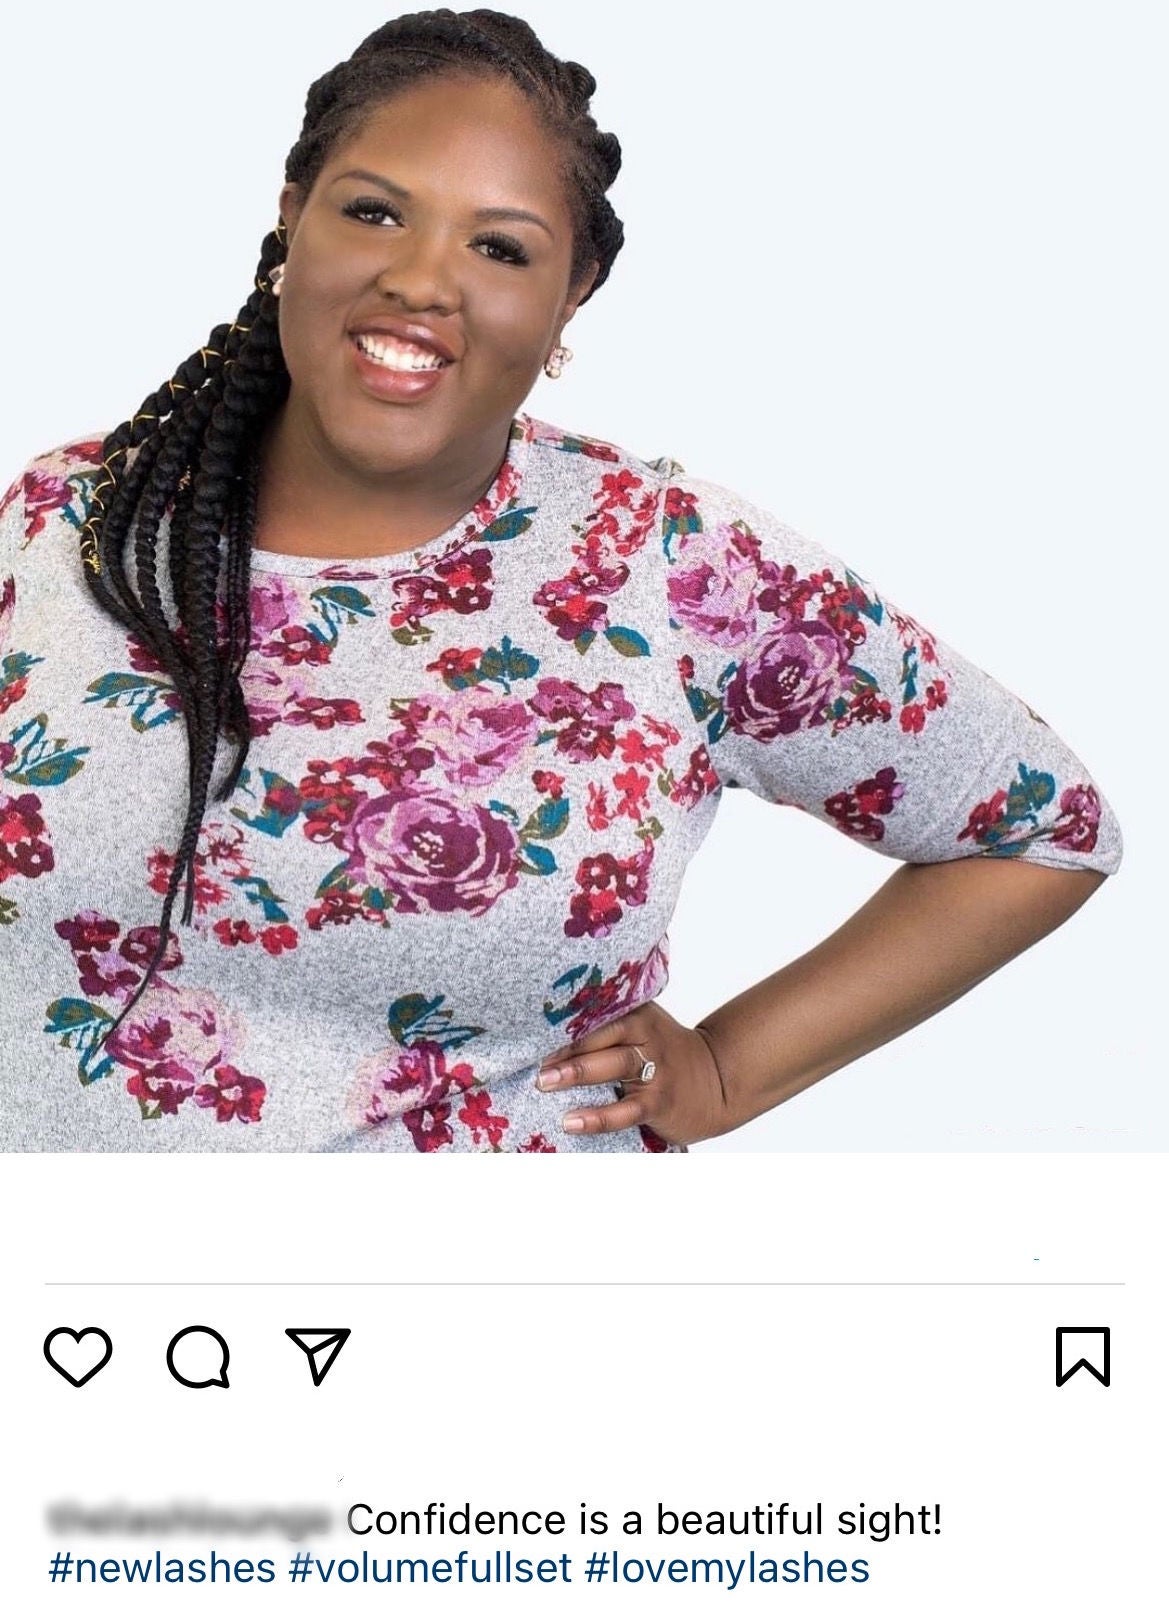 mid-shot of black woman in floral shirt with lash extensions